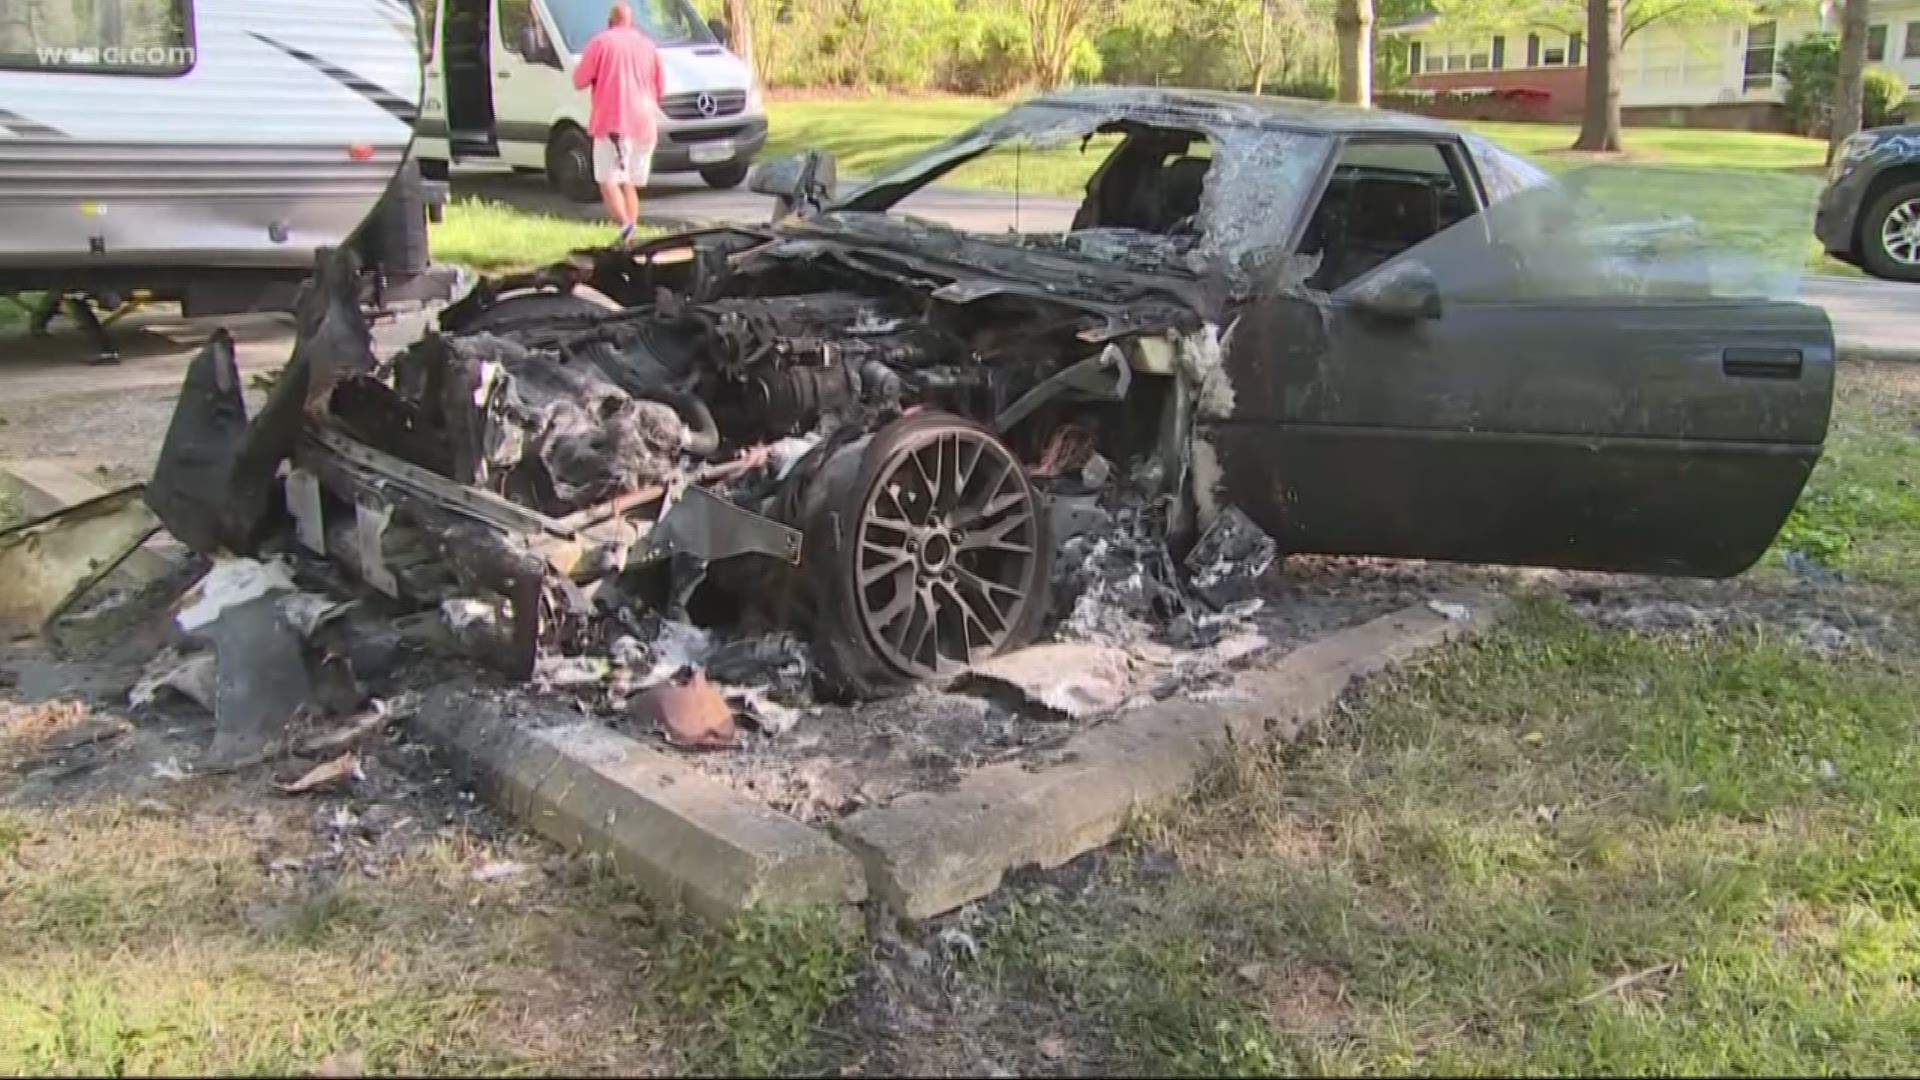 Police say another car fire 13 miles away helped officers connect the two crimes